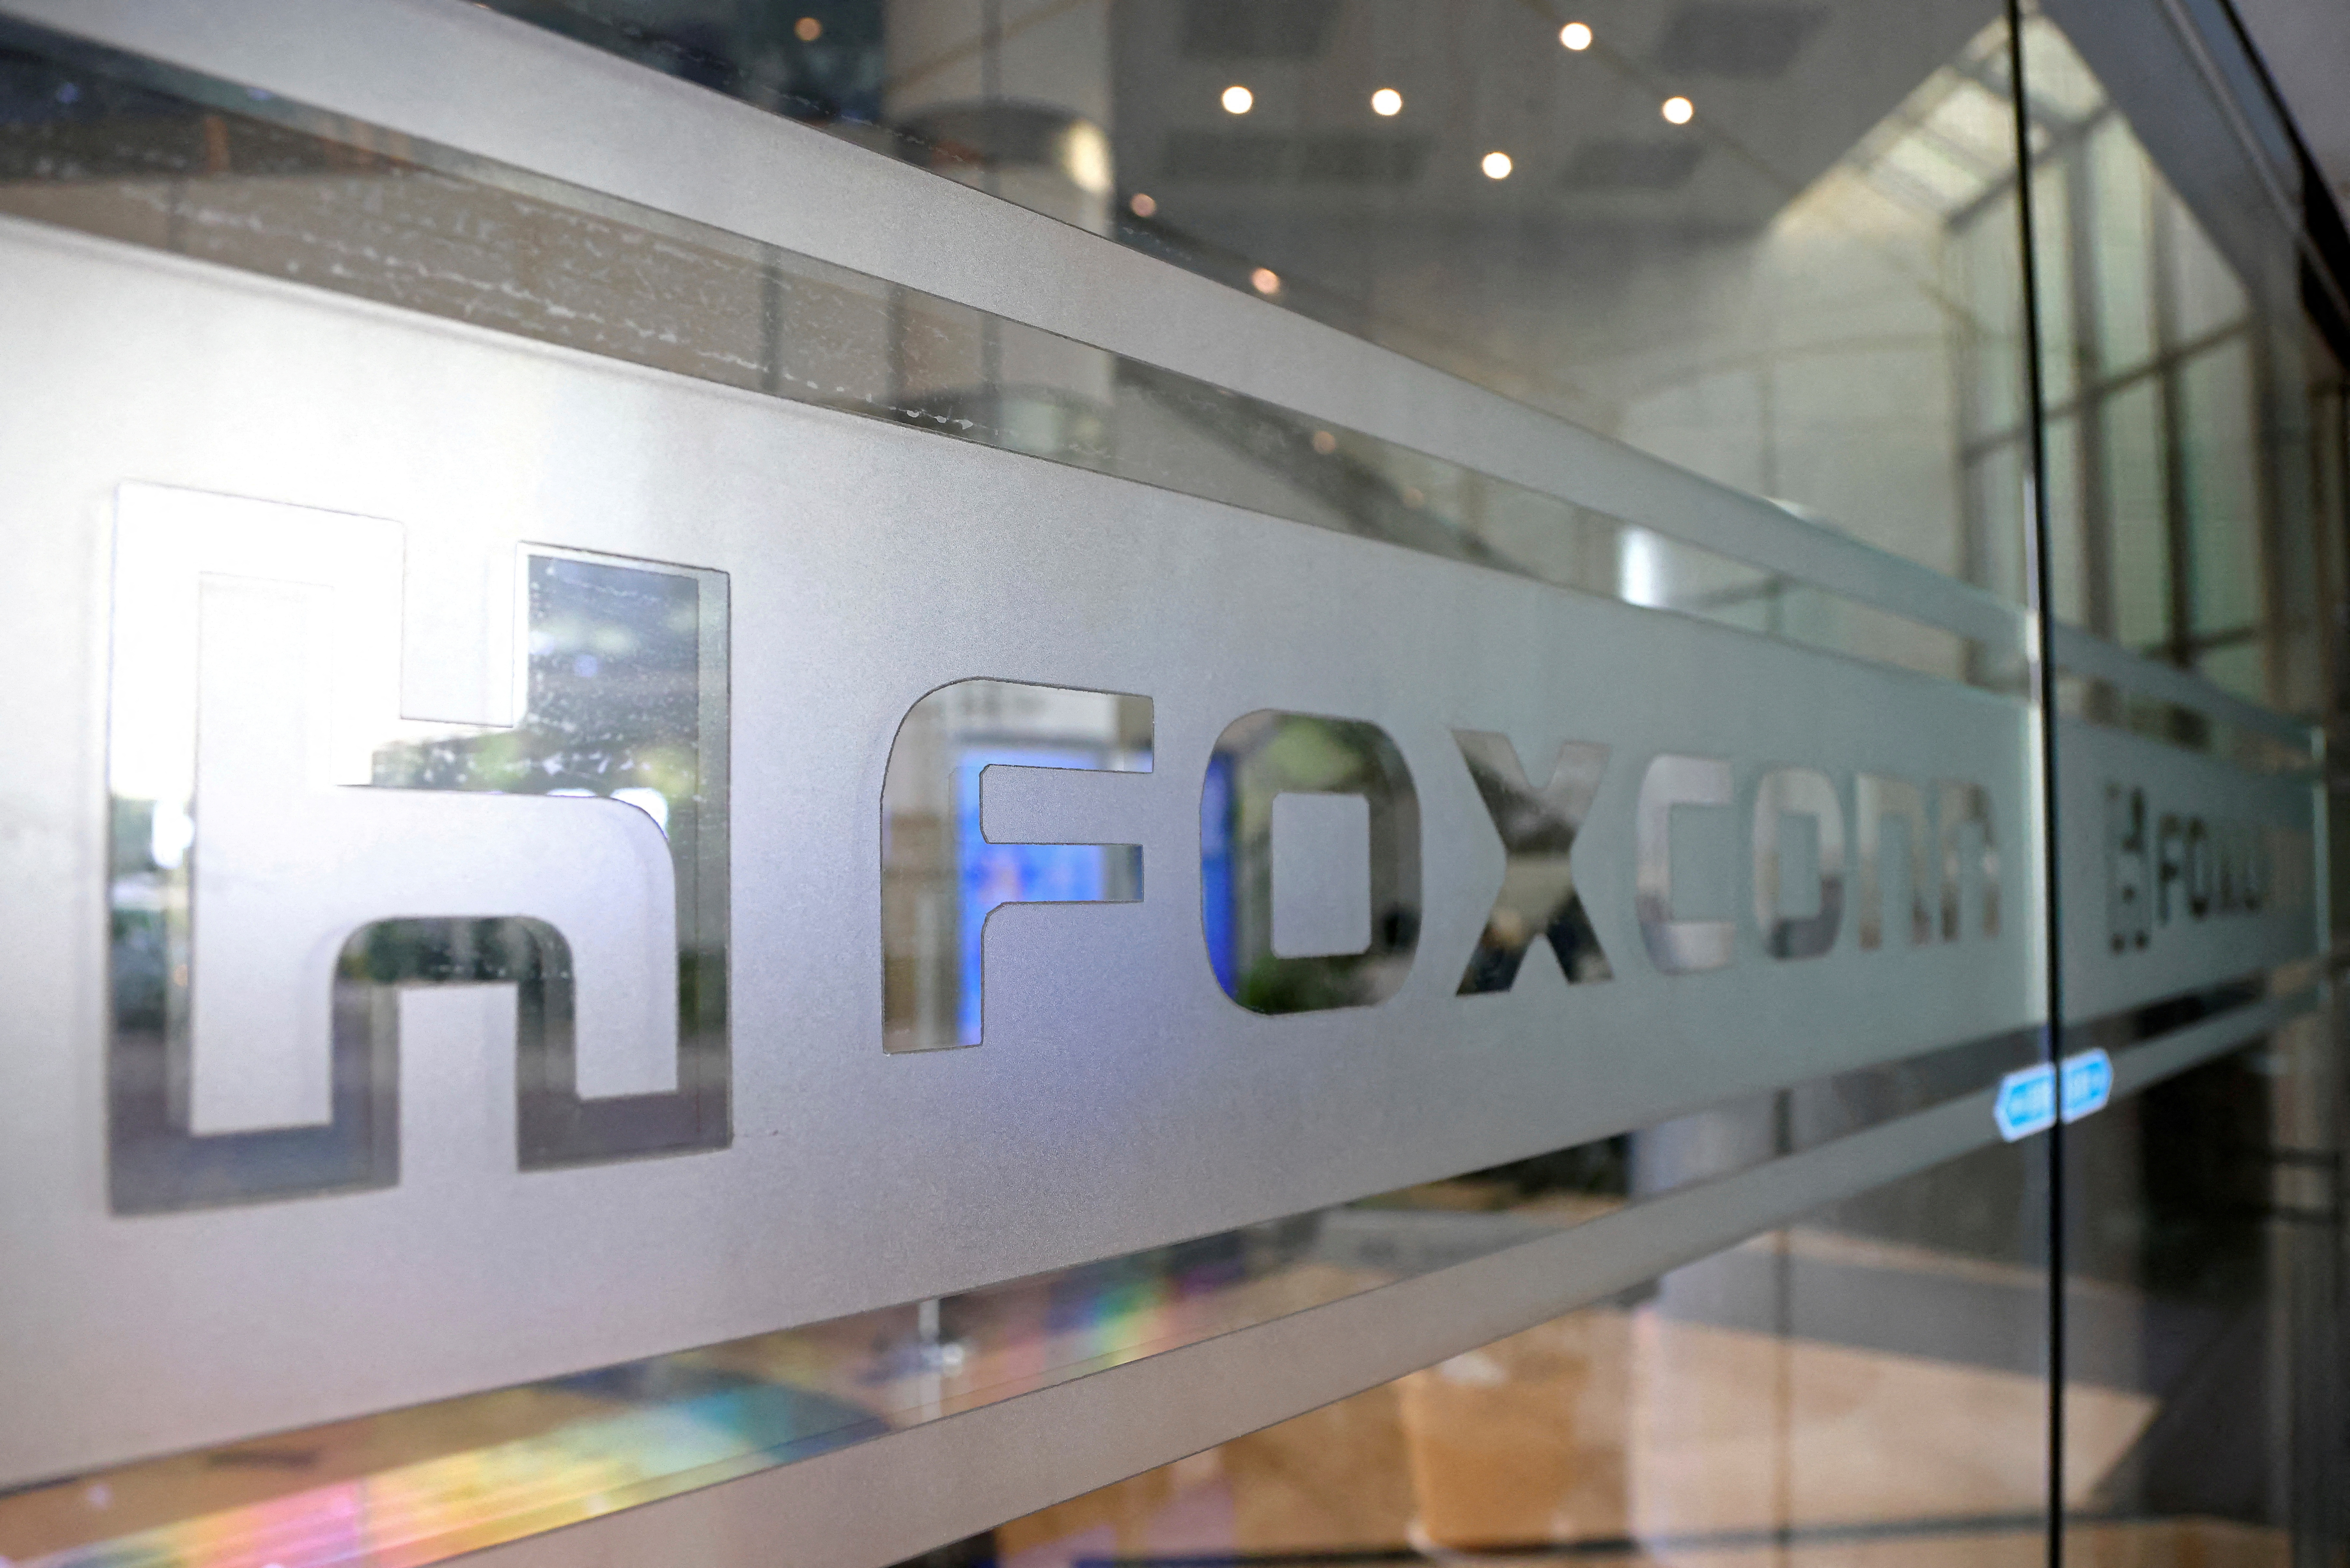 The Foxconn logo is seen on a glass door at its office building in Taipei.